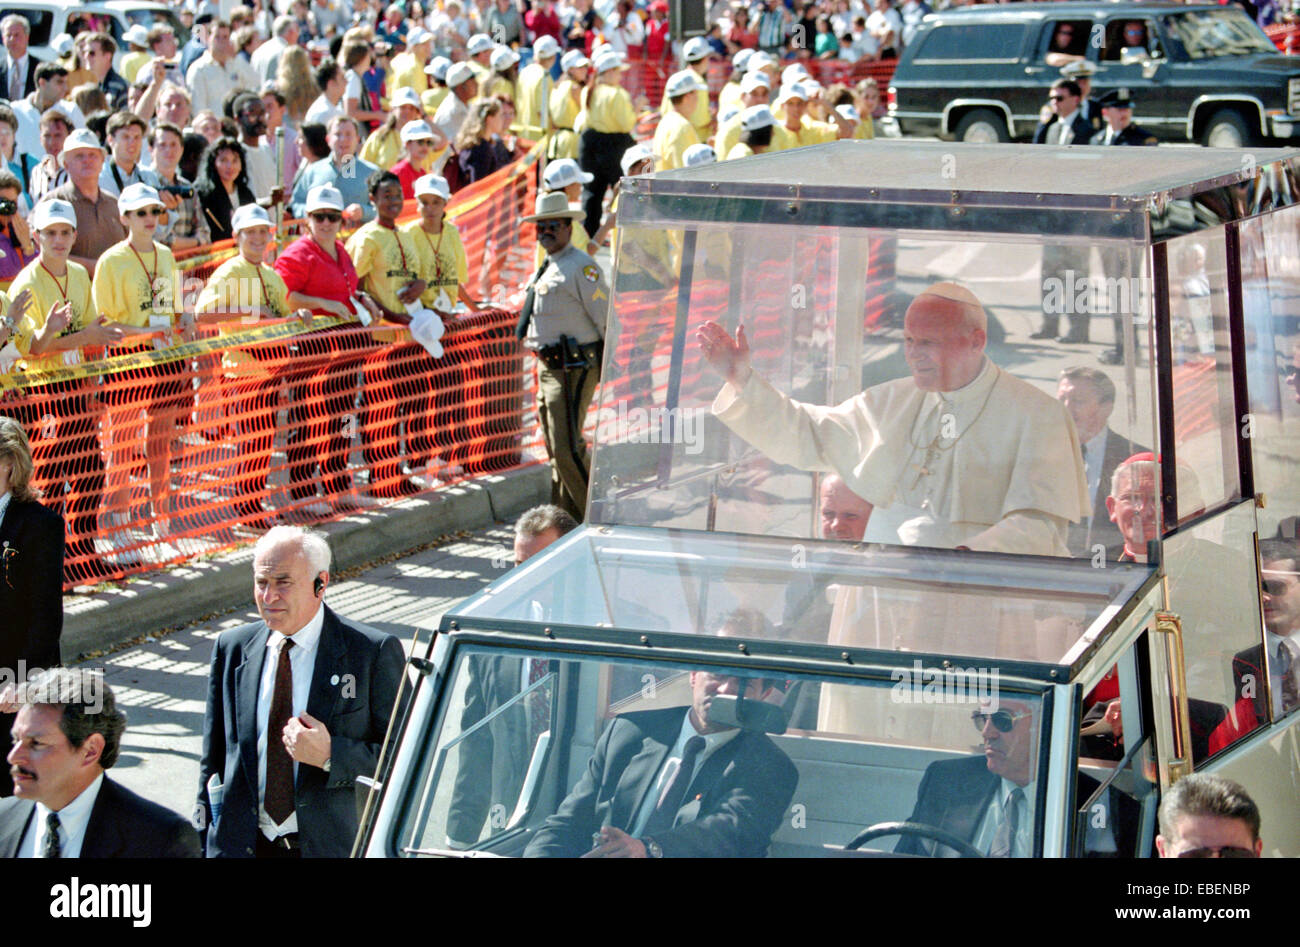 Pope John Paul II waves from inside the popemobile during his visit October 8, 1995 in Baltimore, Maryland. Stock Photo